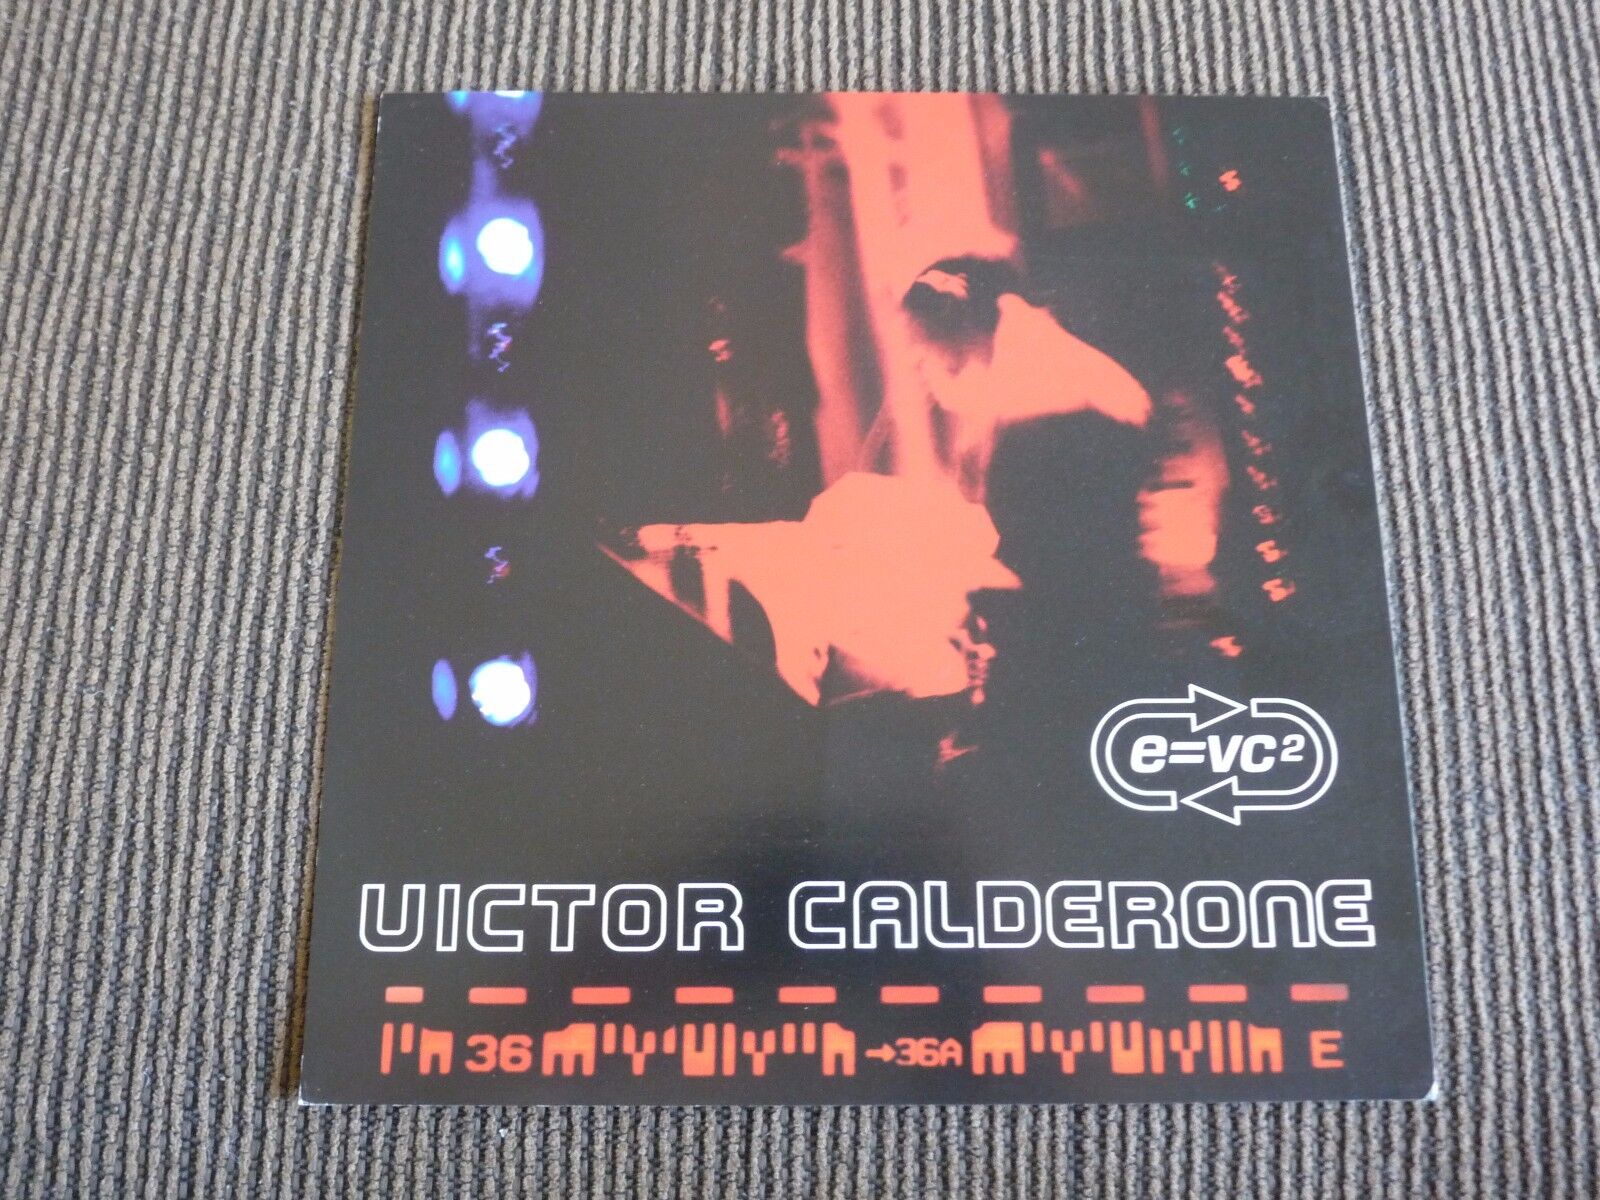 Victor Calderone e=vc2 LP Poster Photo Poster painting Double Sided Flat 12x12 RARE